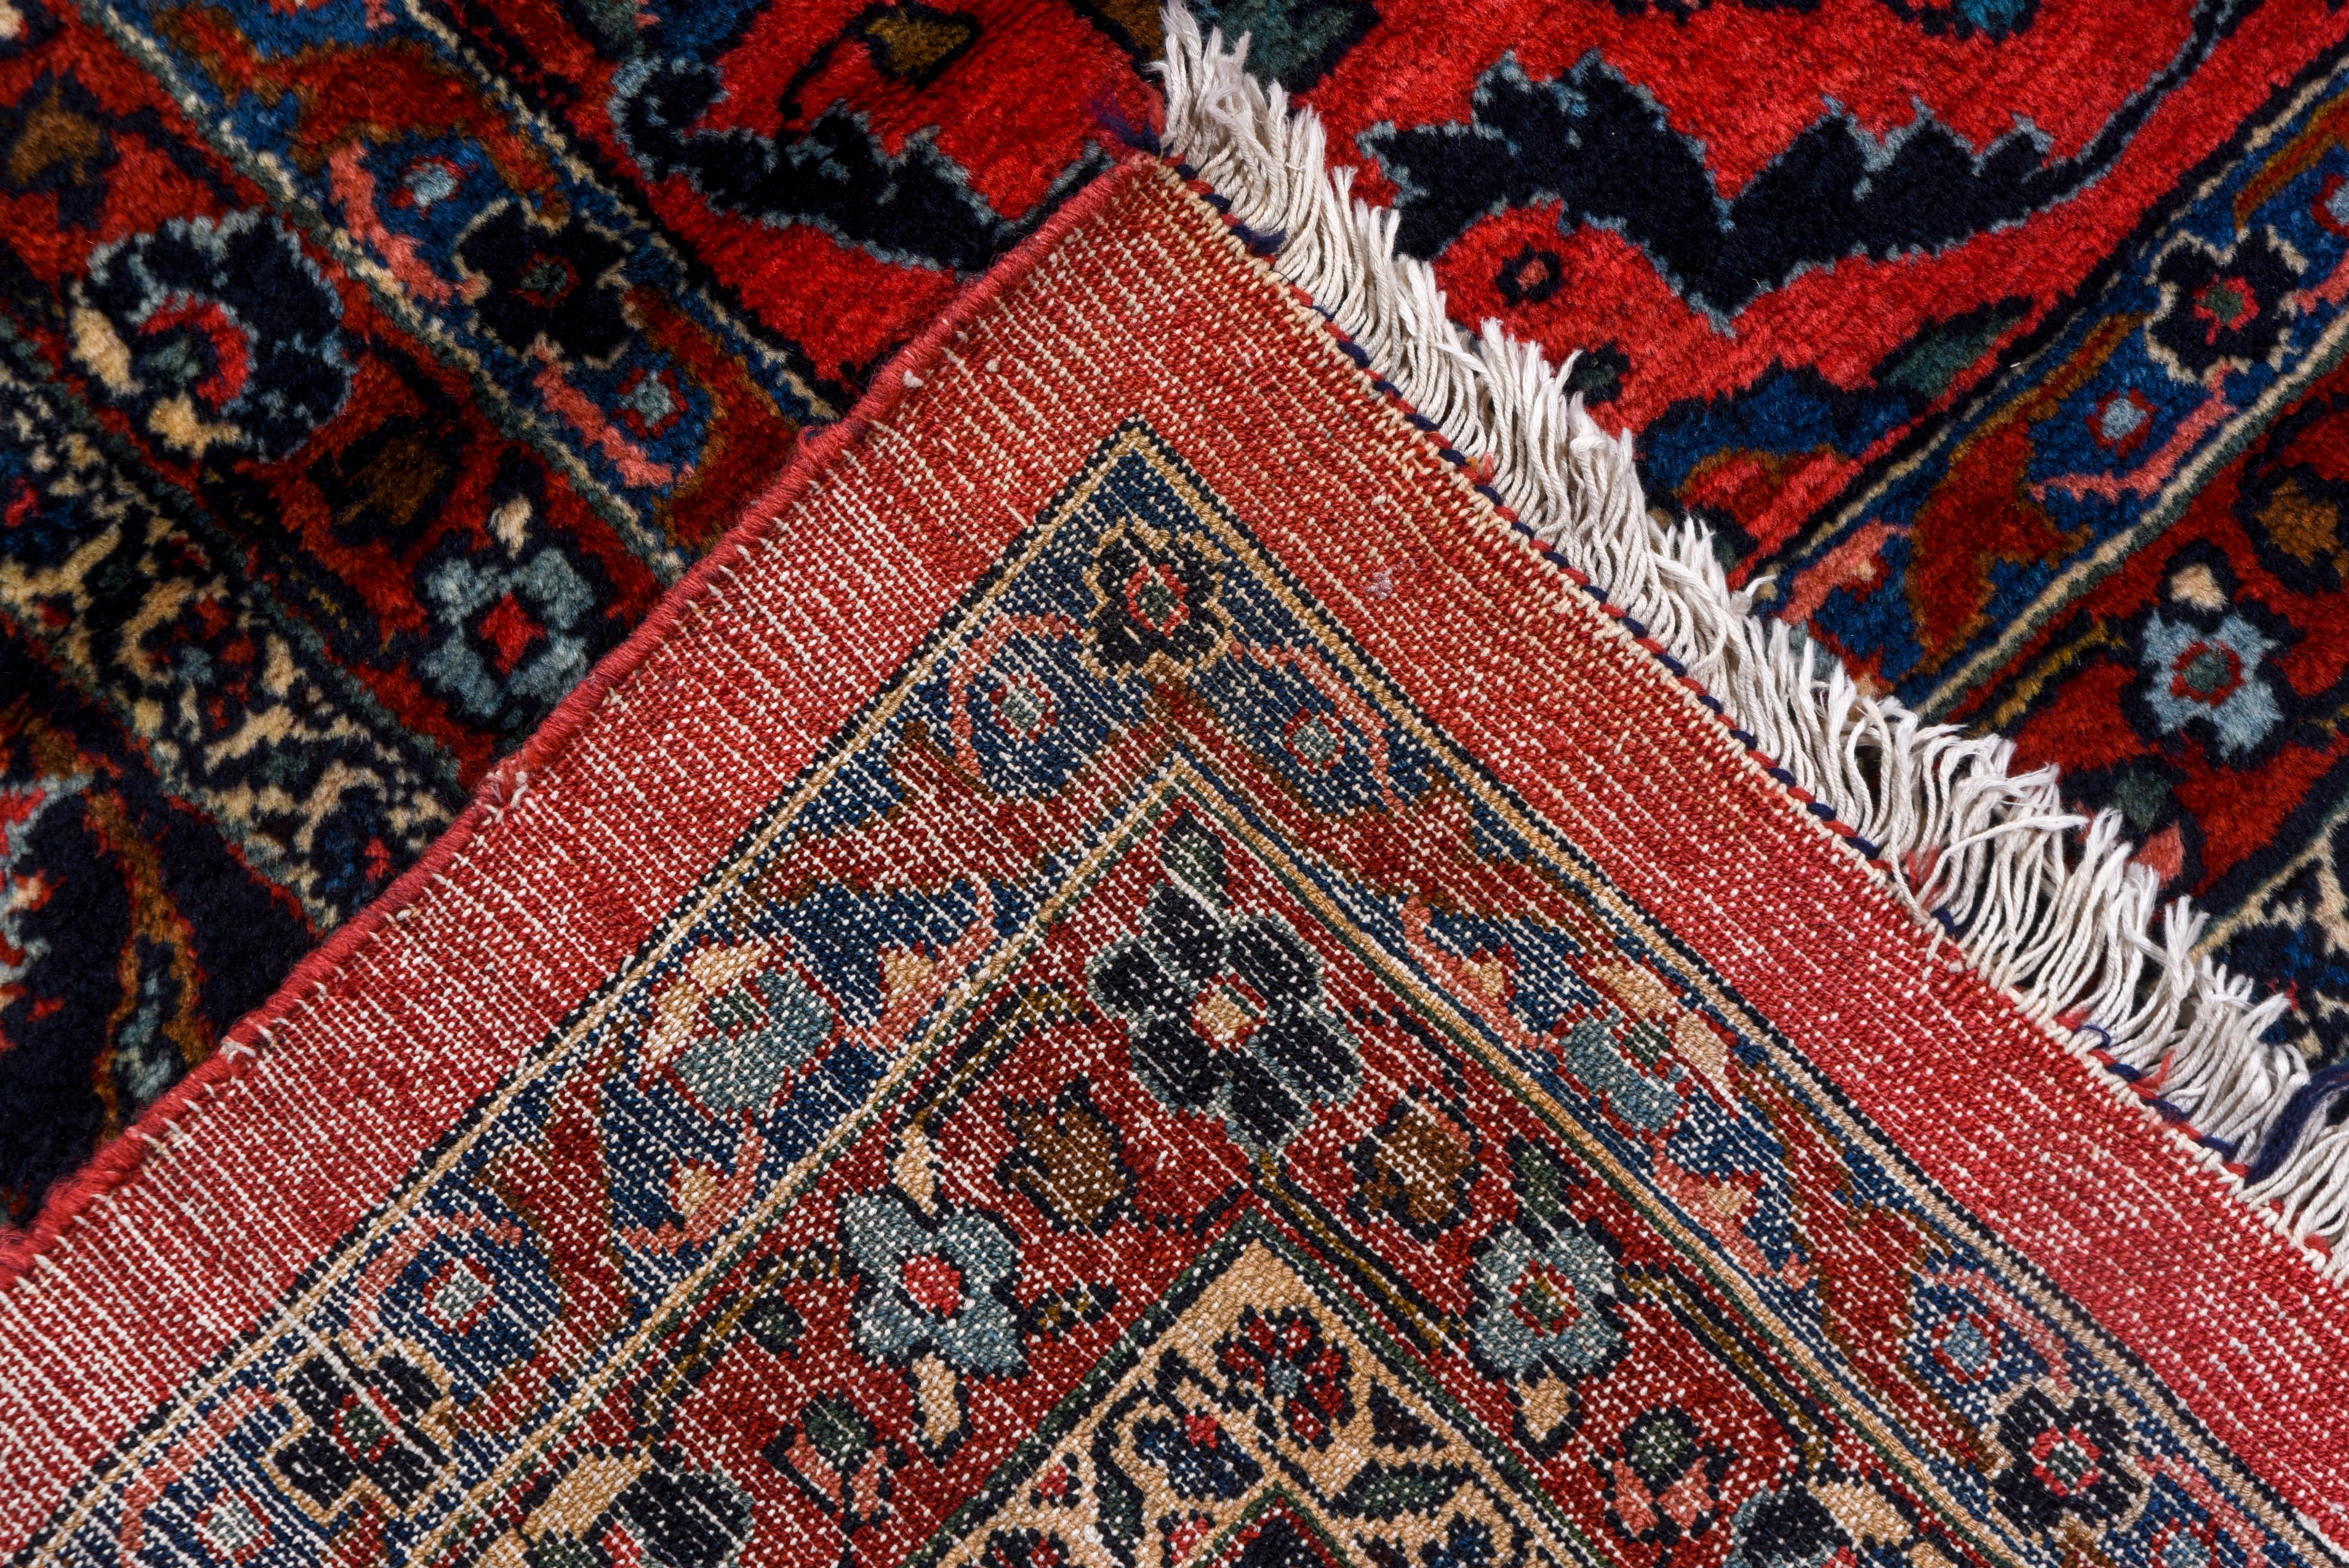 The gently abrashed rose-red field of this west Persian village carpet displays a floating, detached floral spray pattern highlighted in light and dark blues. The navy border of this 